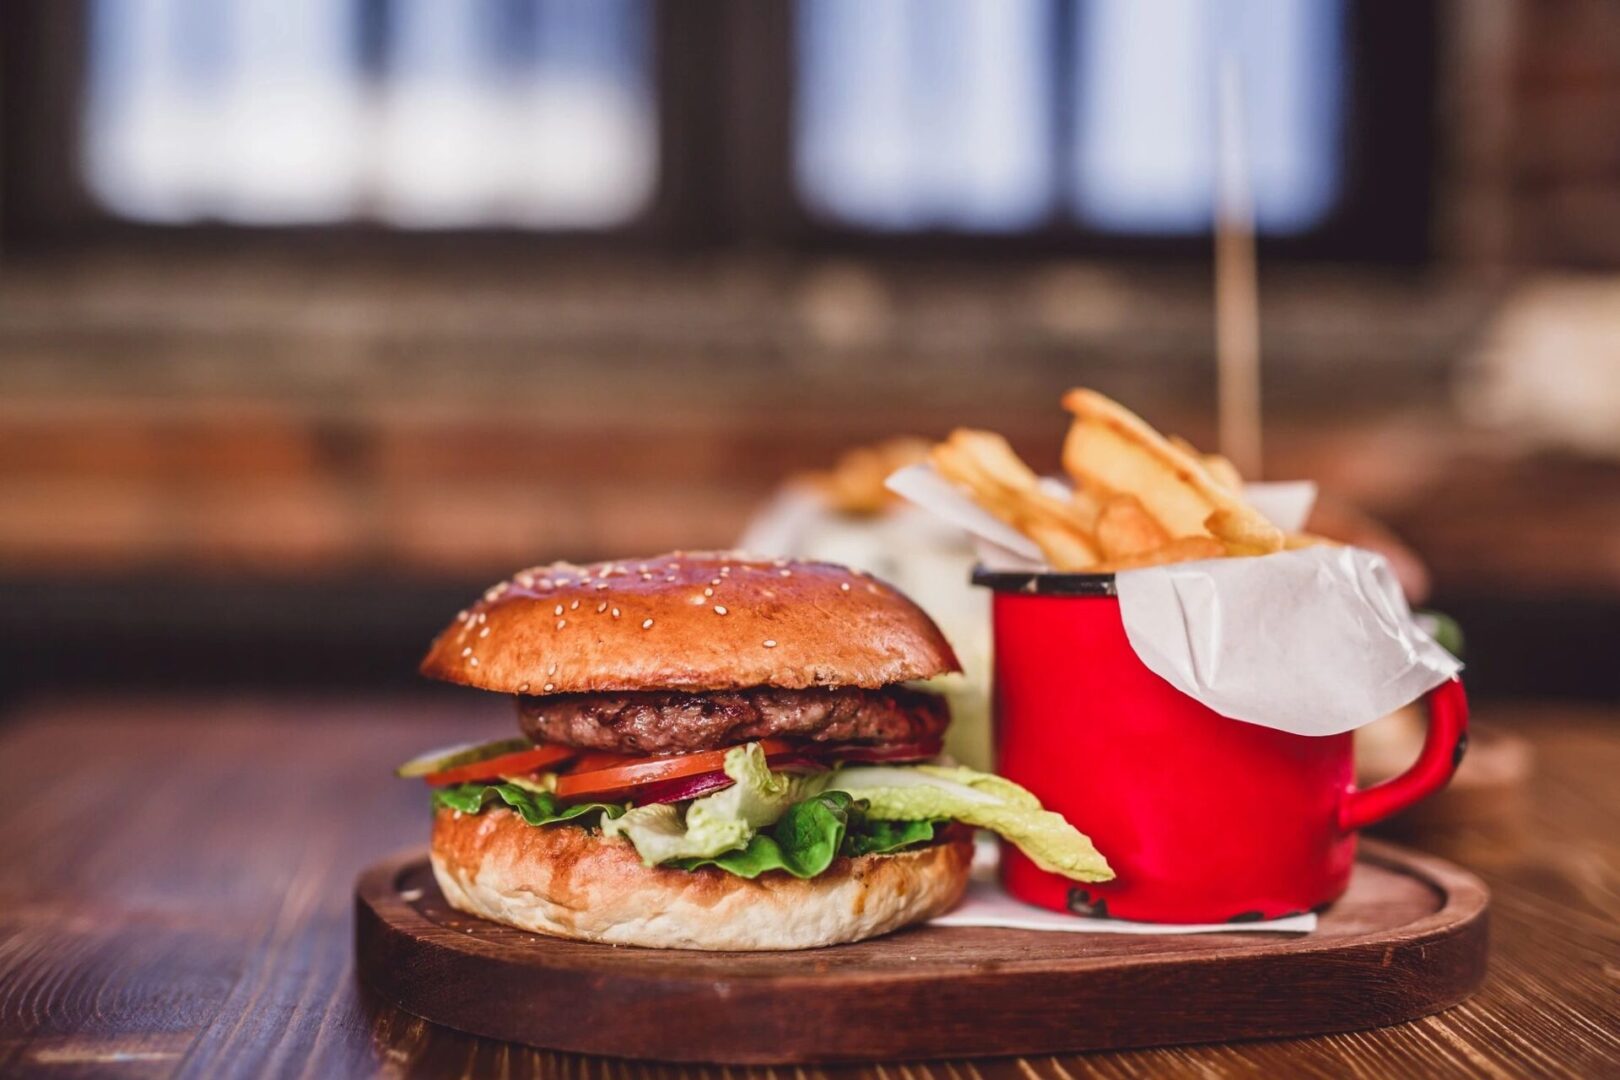 A hamburger and fries on a wooden plate.